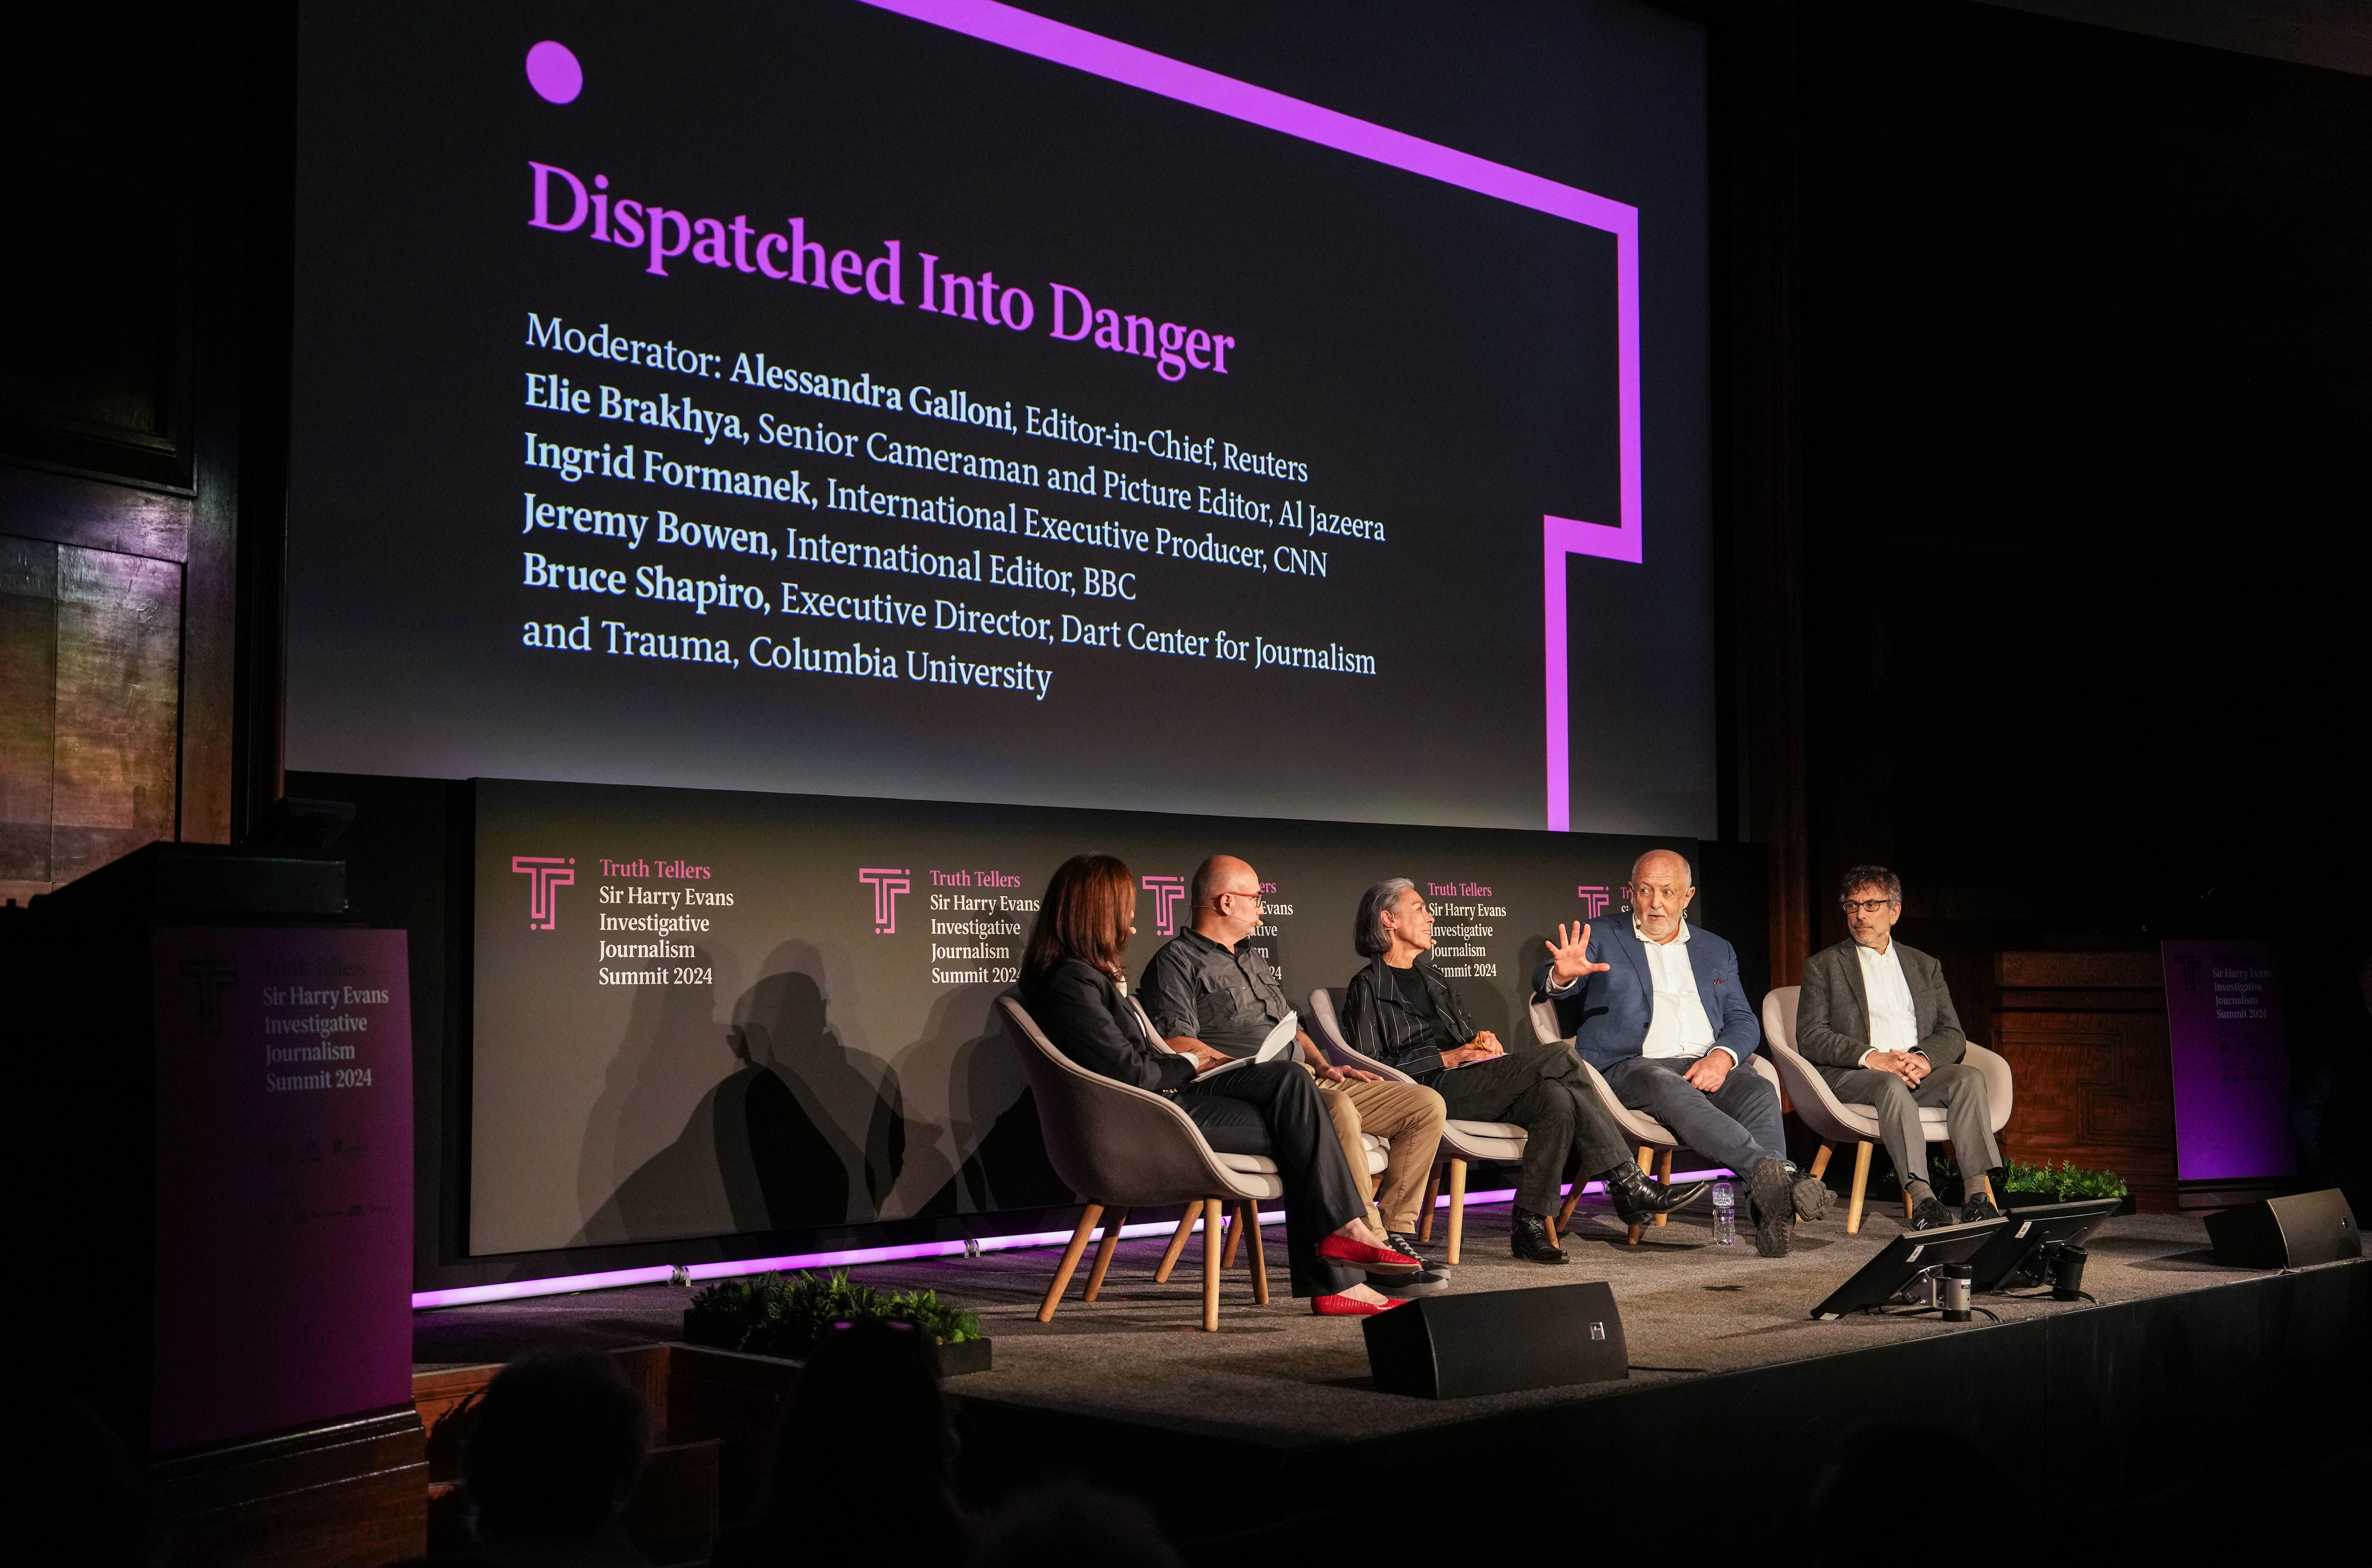 Panel on Dispatched Into Danger chaired by Alessandra Galloni, Editor in Chief, Reuters